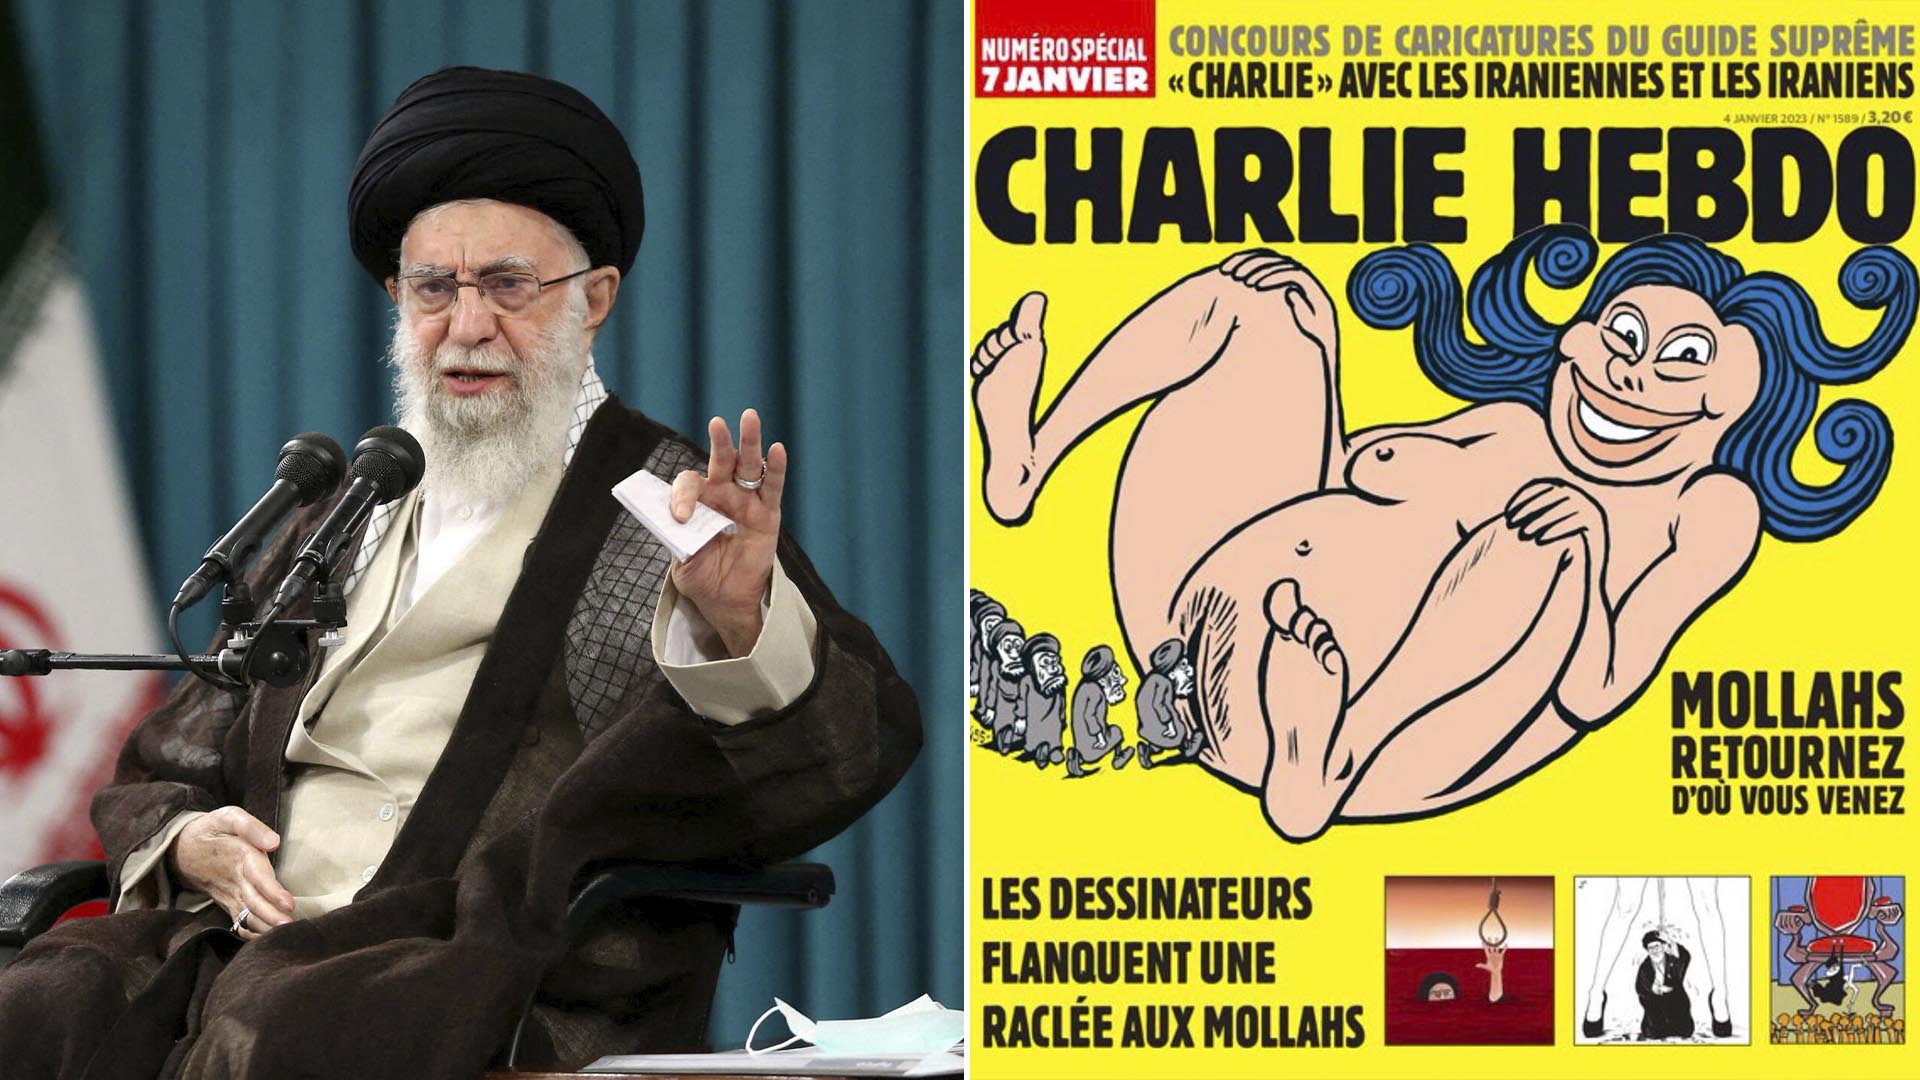 Ali Khamenei and the cover of the latest issue of Charlie Hebdo: "Mullahs, go back where you came from"
